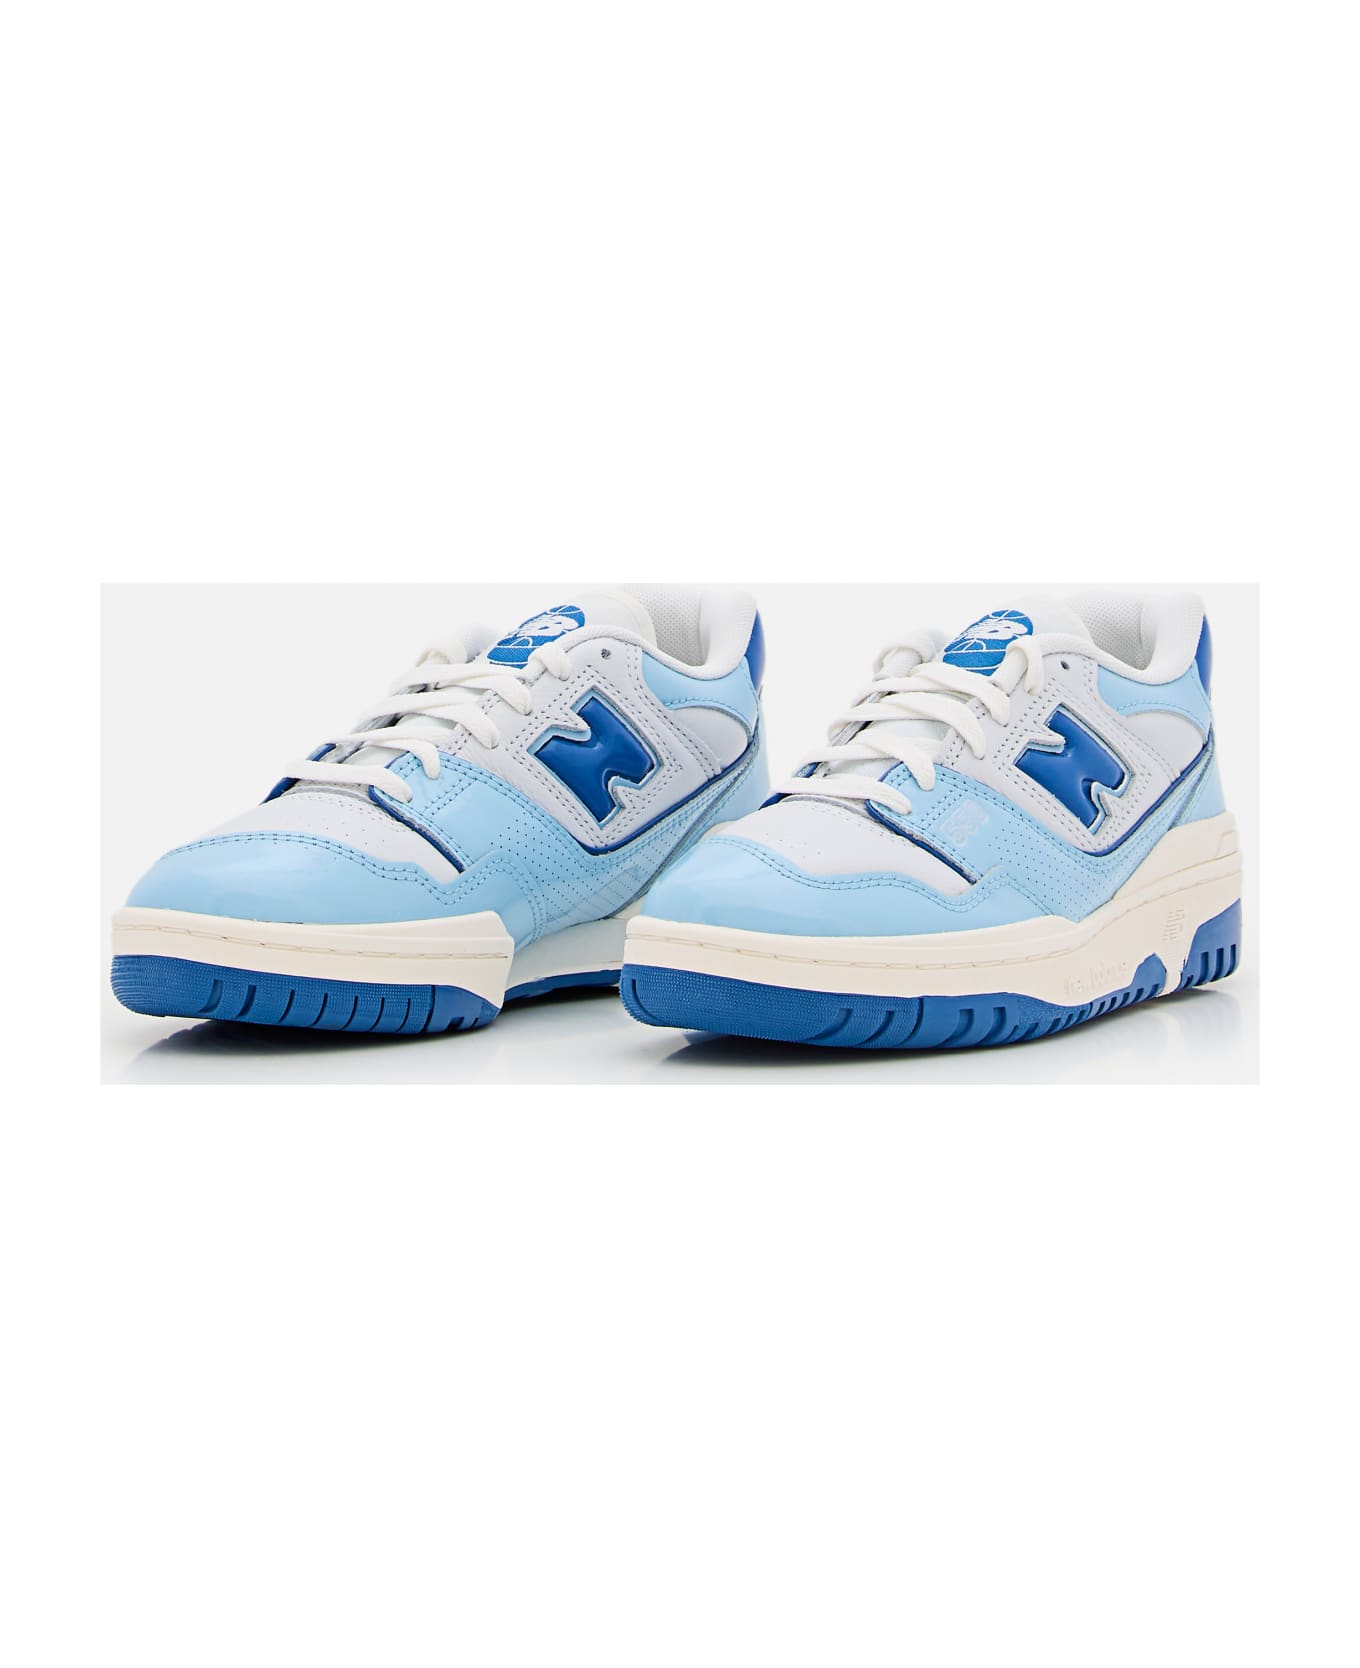 New Balance 550 Leather Sneakers - Clear Blue スニーカー